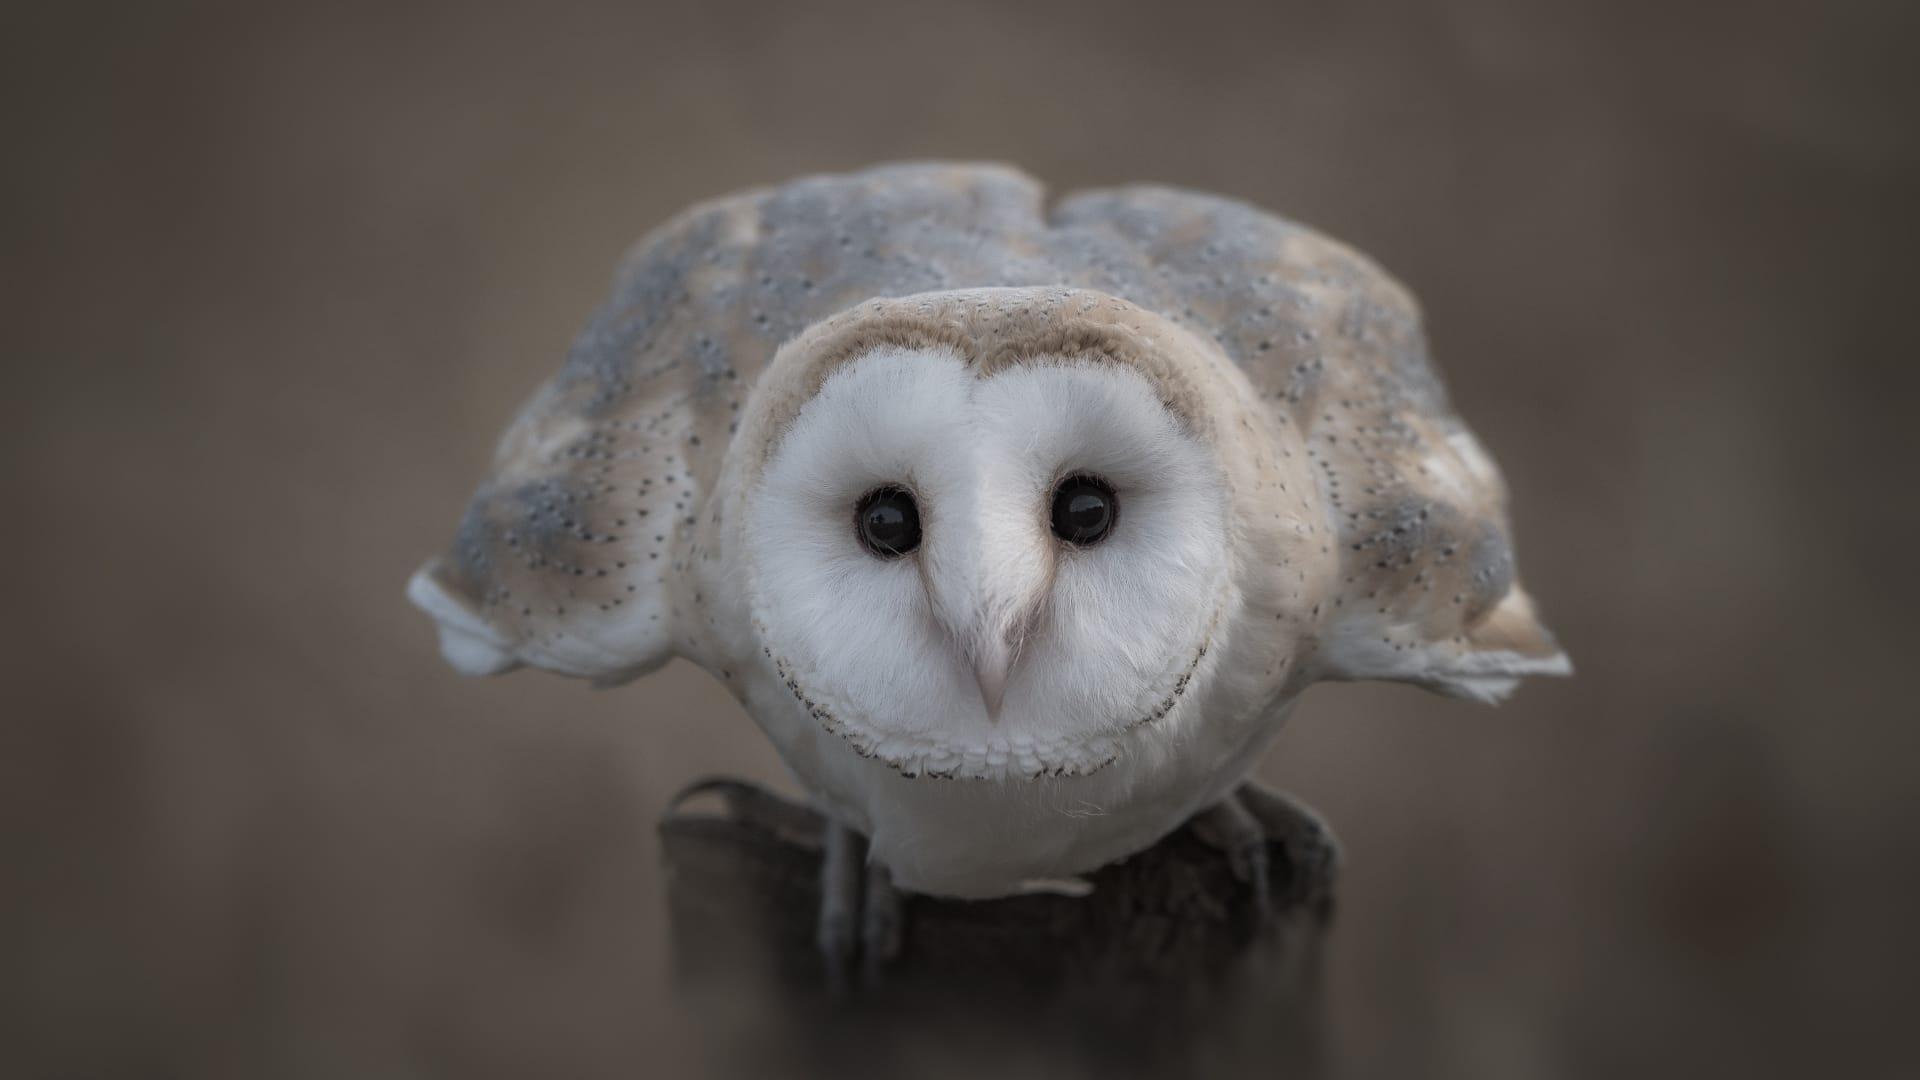 Barn owl pictures